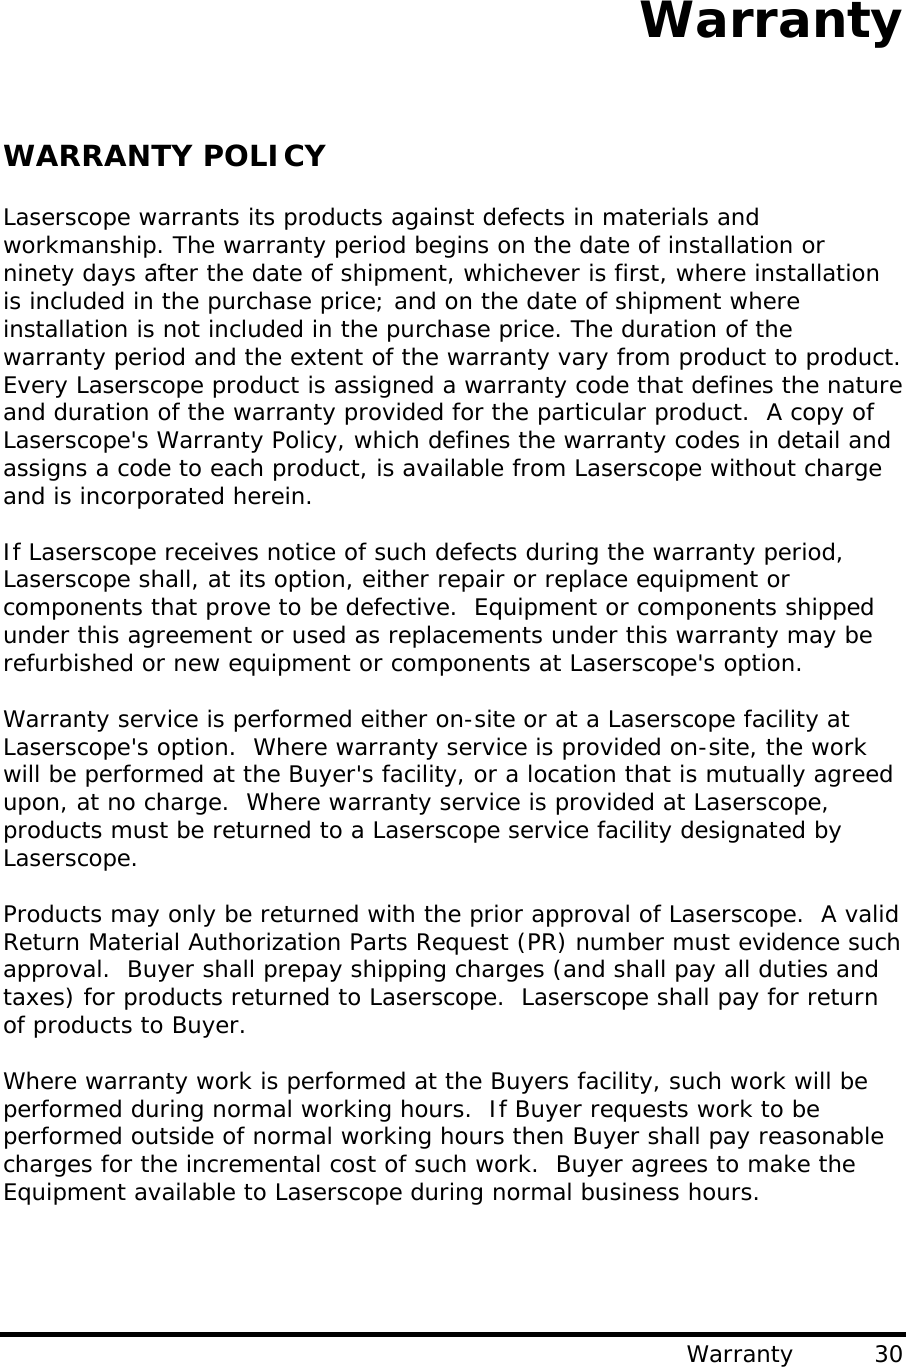                                        Warranty Warranty          30 WARRANTY POLICY  Laserscope warrants its products against defects in materials and workmanship. The warranty period begins on the date of installation or ninety days after the date of shipment, whichever is first, where installation is included in the purchase price; and on the date of shipment where installation is not included in the purchase price. The duration of the warranty period and the extent of the warranty vary from product to product.  Every Laserscope product is assigned a warranty code that defines the nature and duration of the warranty provided for the particular product.  A copy of Laserscope&apos;s Warranty Policy, which defines the warranty codes in detail and assigns a code to each product, is available from Laserscope without charge and is incorporated herein.  If Laserscope receives notice of such defects during the warranty period, Laserscope shall, at its option, either repair or replace equipment or components that prove to be defective.  Equipment or components shipped under this agreement or used as replacements under this warranty may be refurbished or new equipment or components at Laserscope&apos;s option.  Warranty service is performed either on-site or at a Laserscope facility at Laserscope&apos;s option.  Where warranty service is provided on-site, the work will be performed at the Buyer&apos;s facility, or a location that is mutually agreed upon, at no charge.  Where warranty service is provided at Laserscope, products must be returned to a Laserscope service facility designated by Laserscope.    Products may only be returned with the prior approval of Laserscope.  A valid Return Material Authorization Parts Request (PR) number must evidence such approval.  Buyer shall prepay shipping charges (and shall pay all duties and taxes) for products returned to Laserscope.  Laserscope shall pay for return of products to Buyer.    Where warranty work is performed at the Buyers facility, such work will be performed during normal working hours.  If Buyer requests work to be performed outside of normal working hours then Buyer shall pay reasonable charges for the incremental cost of such work.  Buyer agrees to make the Equipment available to Laserscope during normal business hours. 